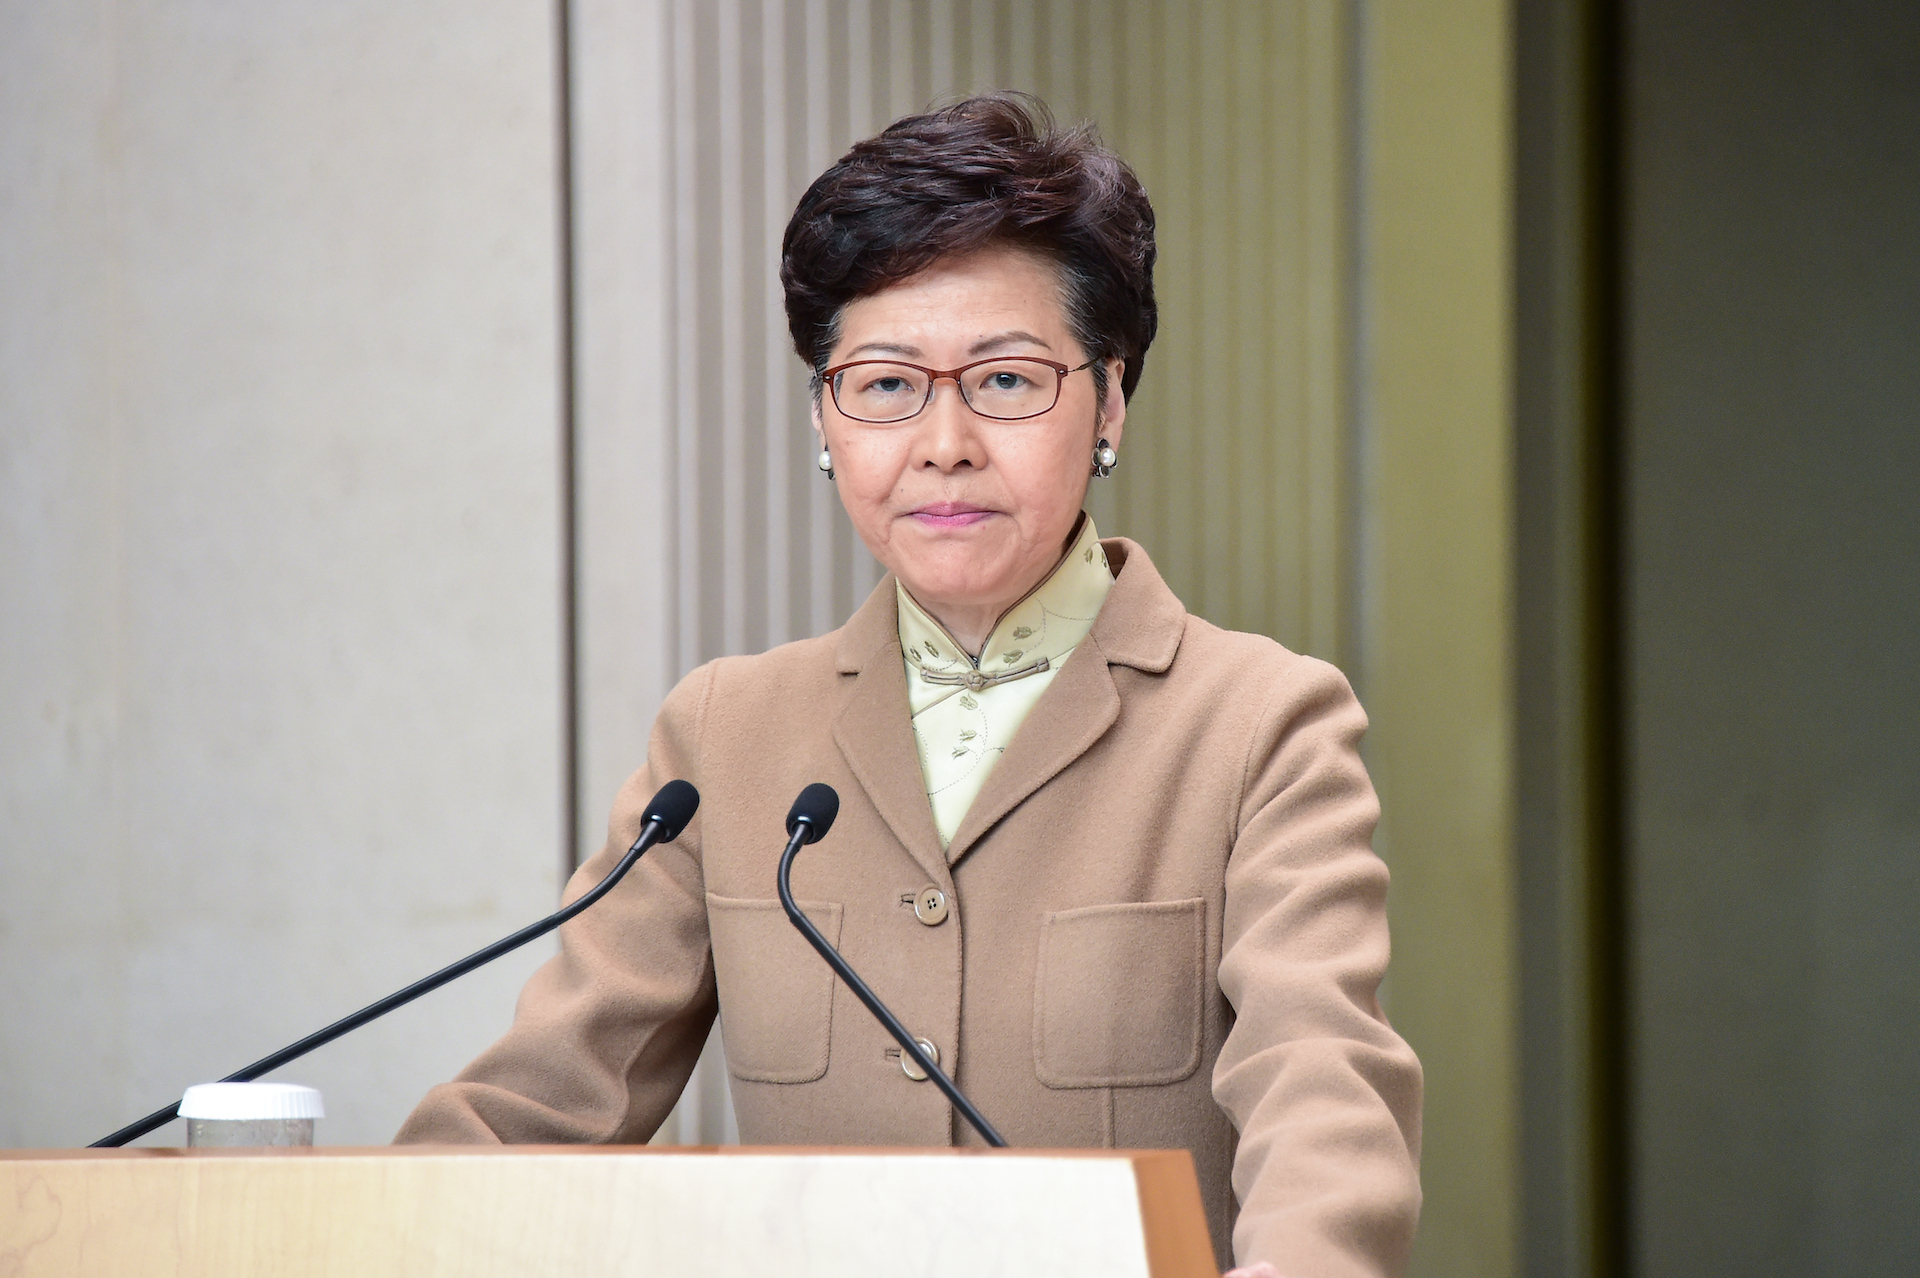 Hong Kong Leader Carrie Lam Commits to Work Closely With New Beijing Envoy